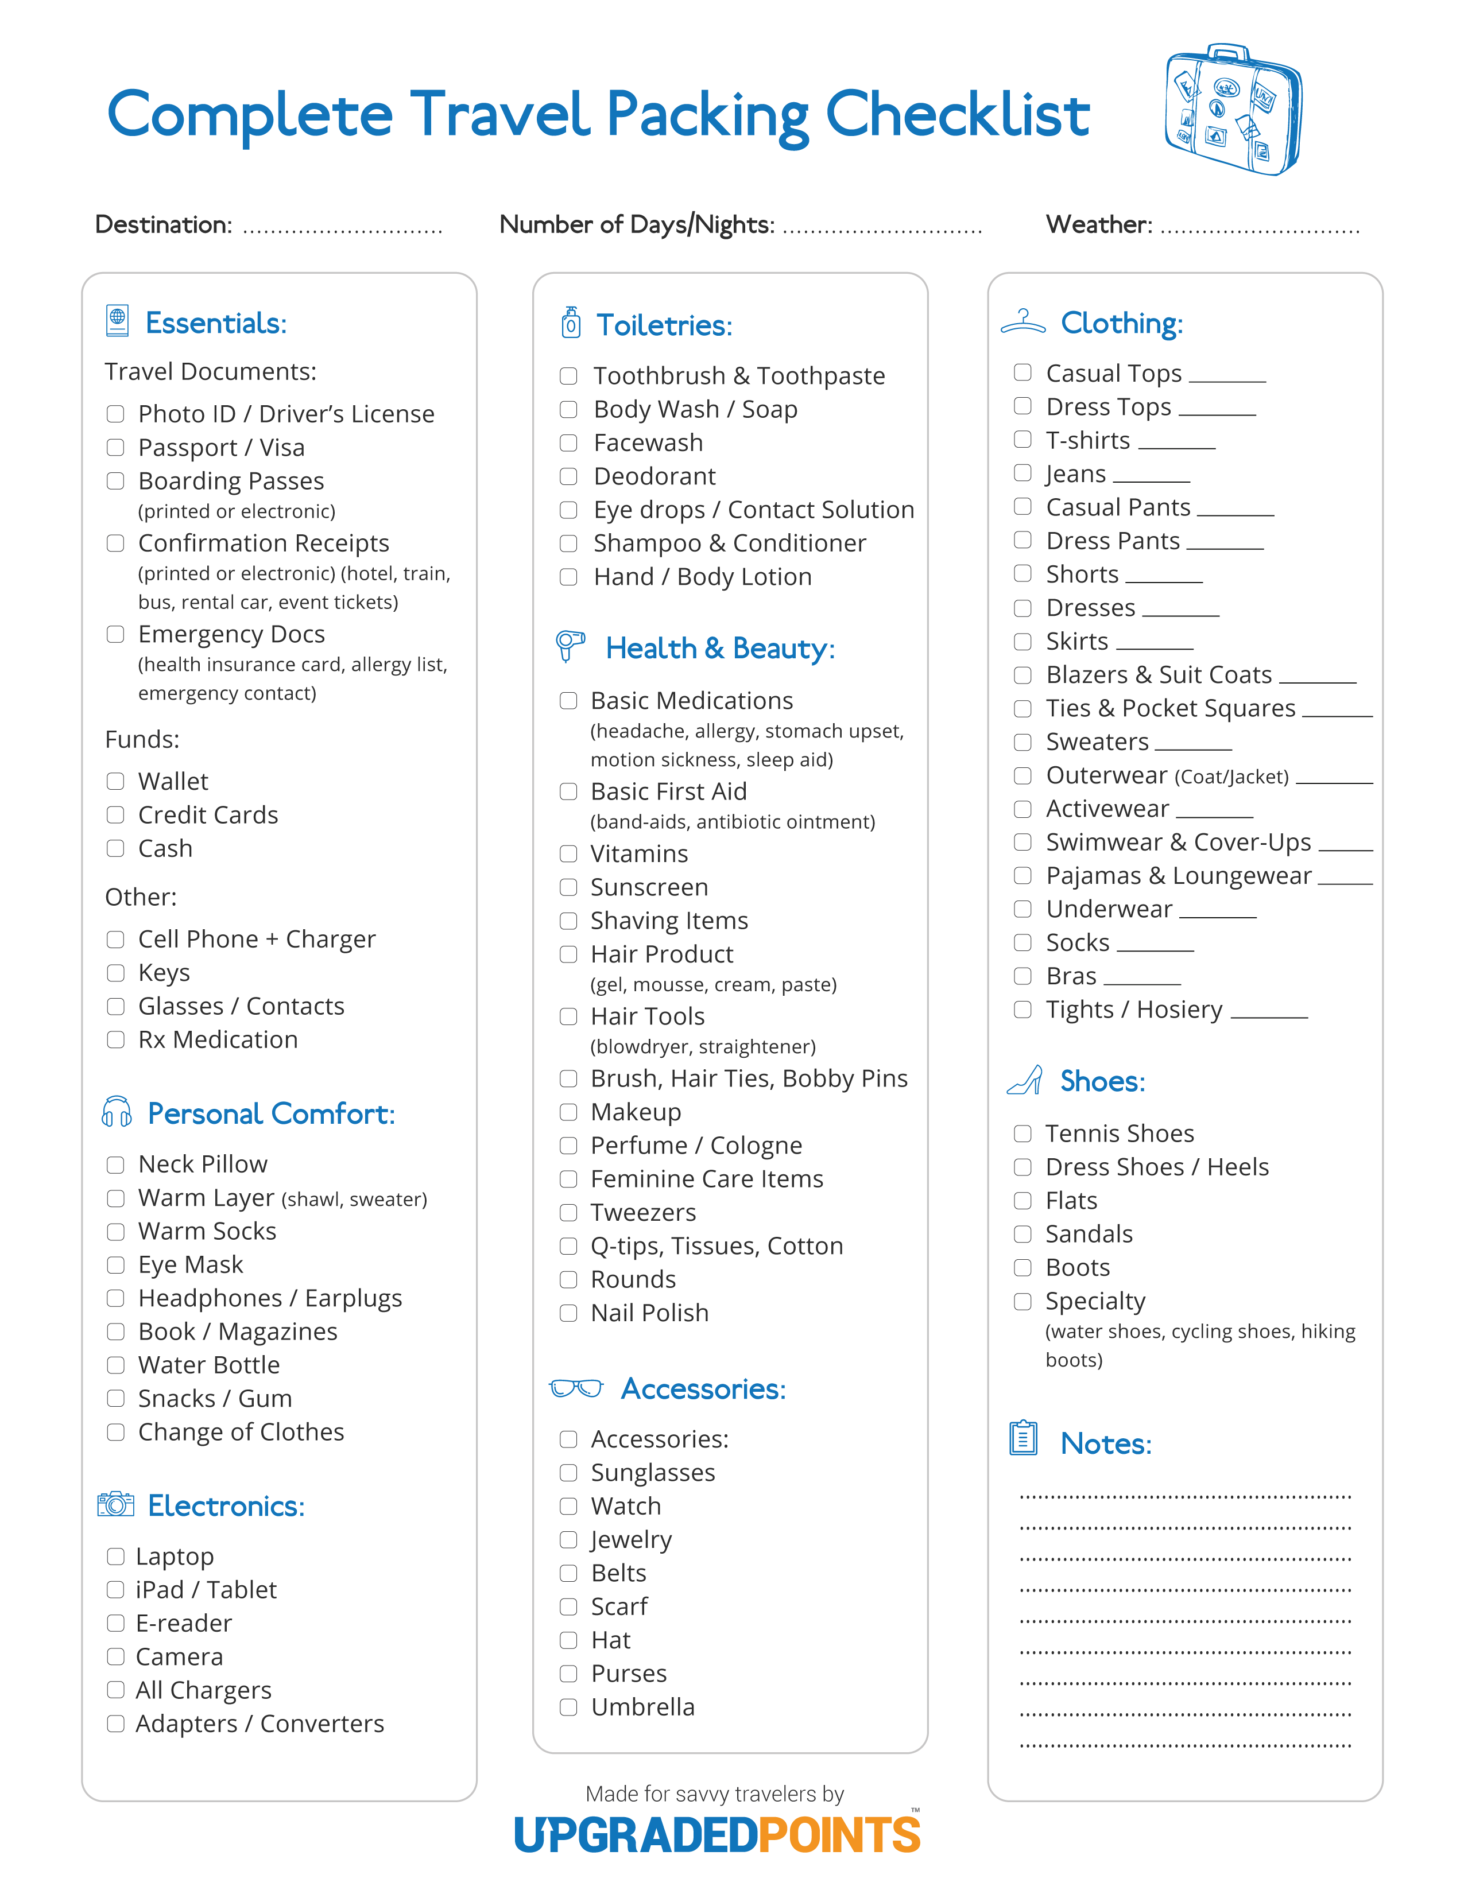 cruise-vacation-packing-list-free-printable-download